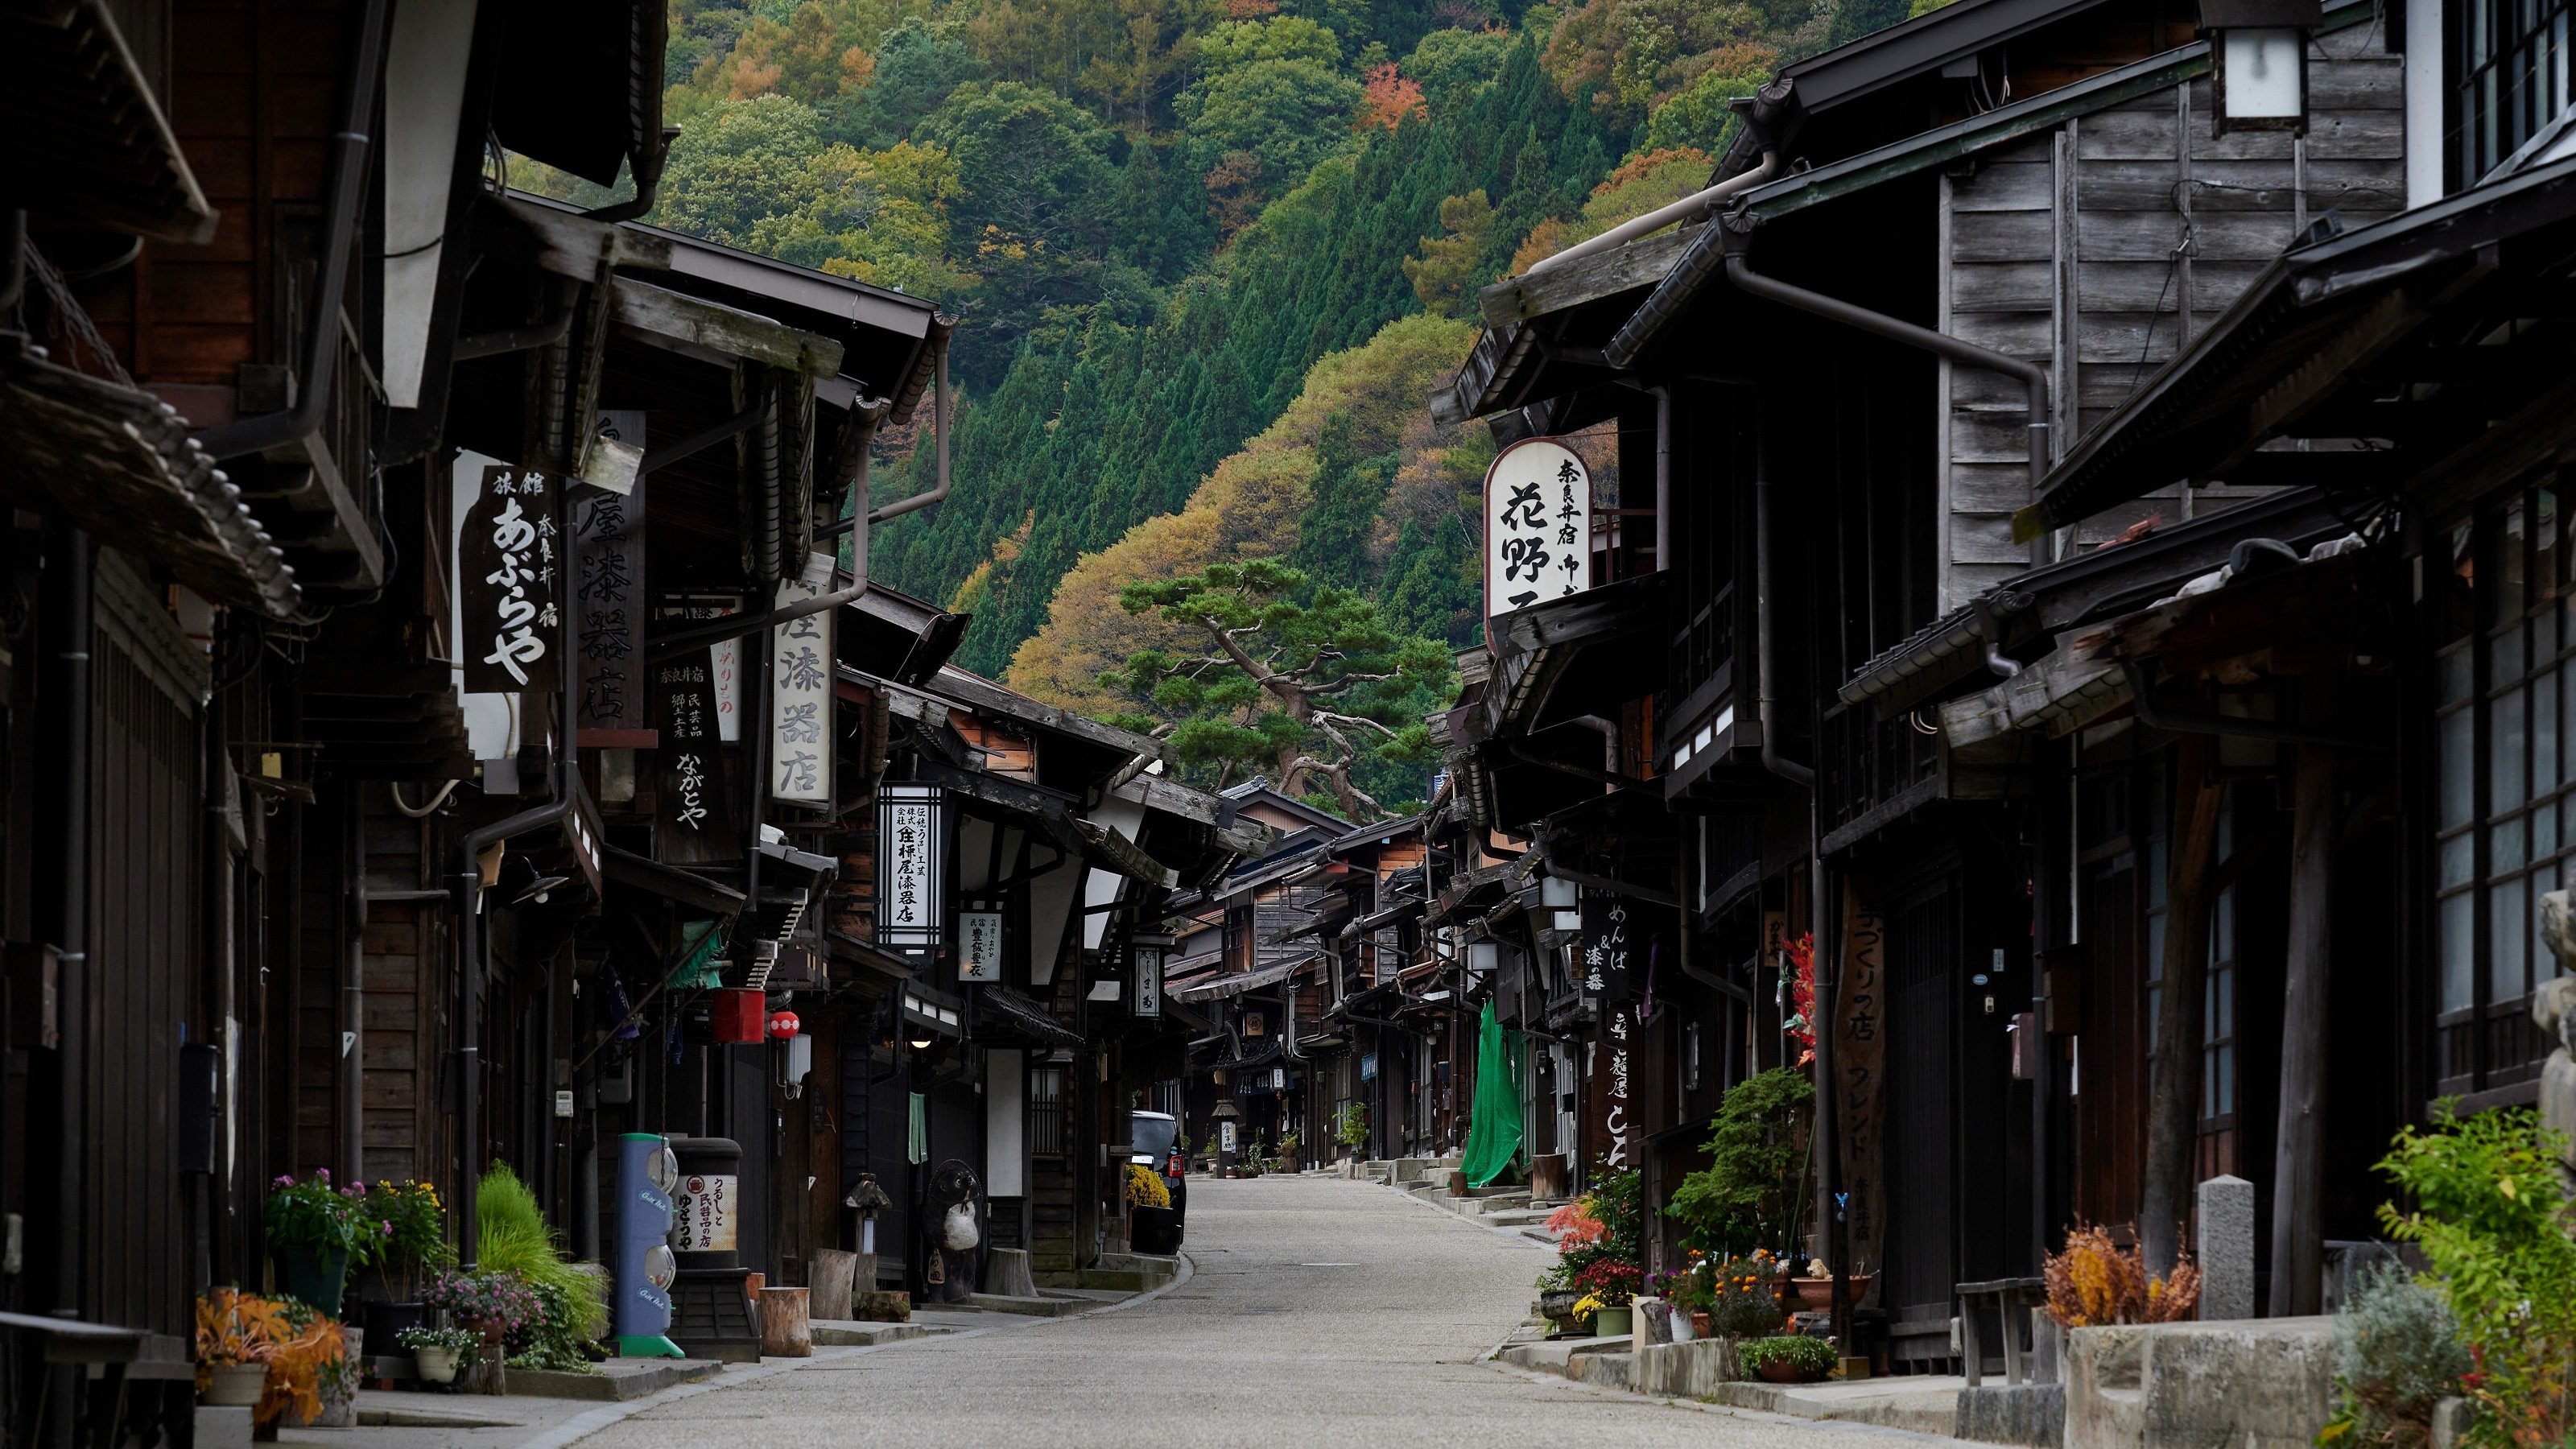 Narai-juku has a history of 400 years and still retains the remnants of that time as the longest post town in Japan.